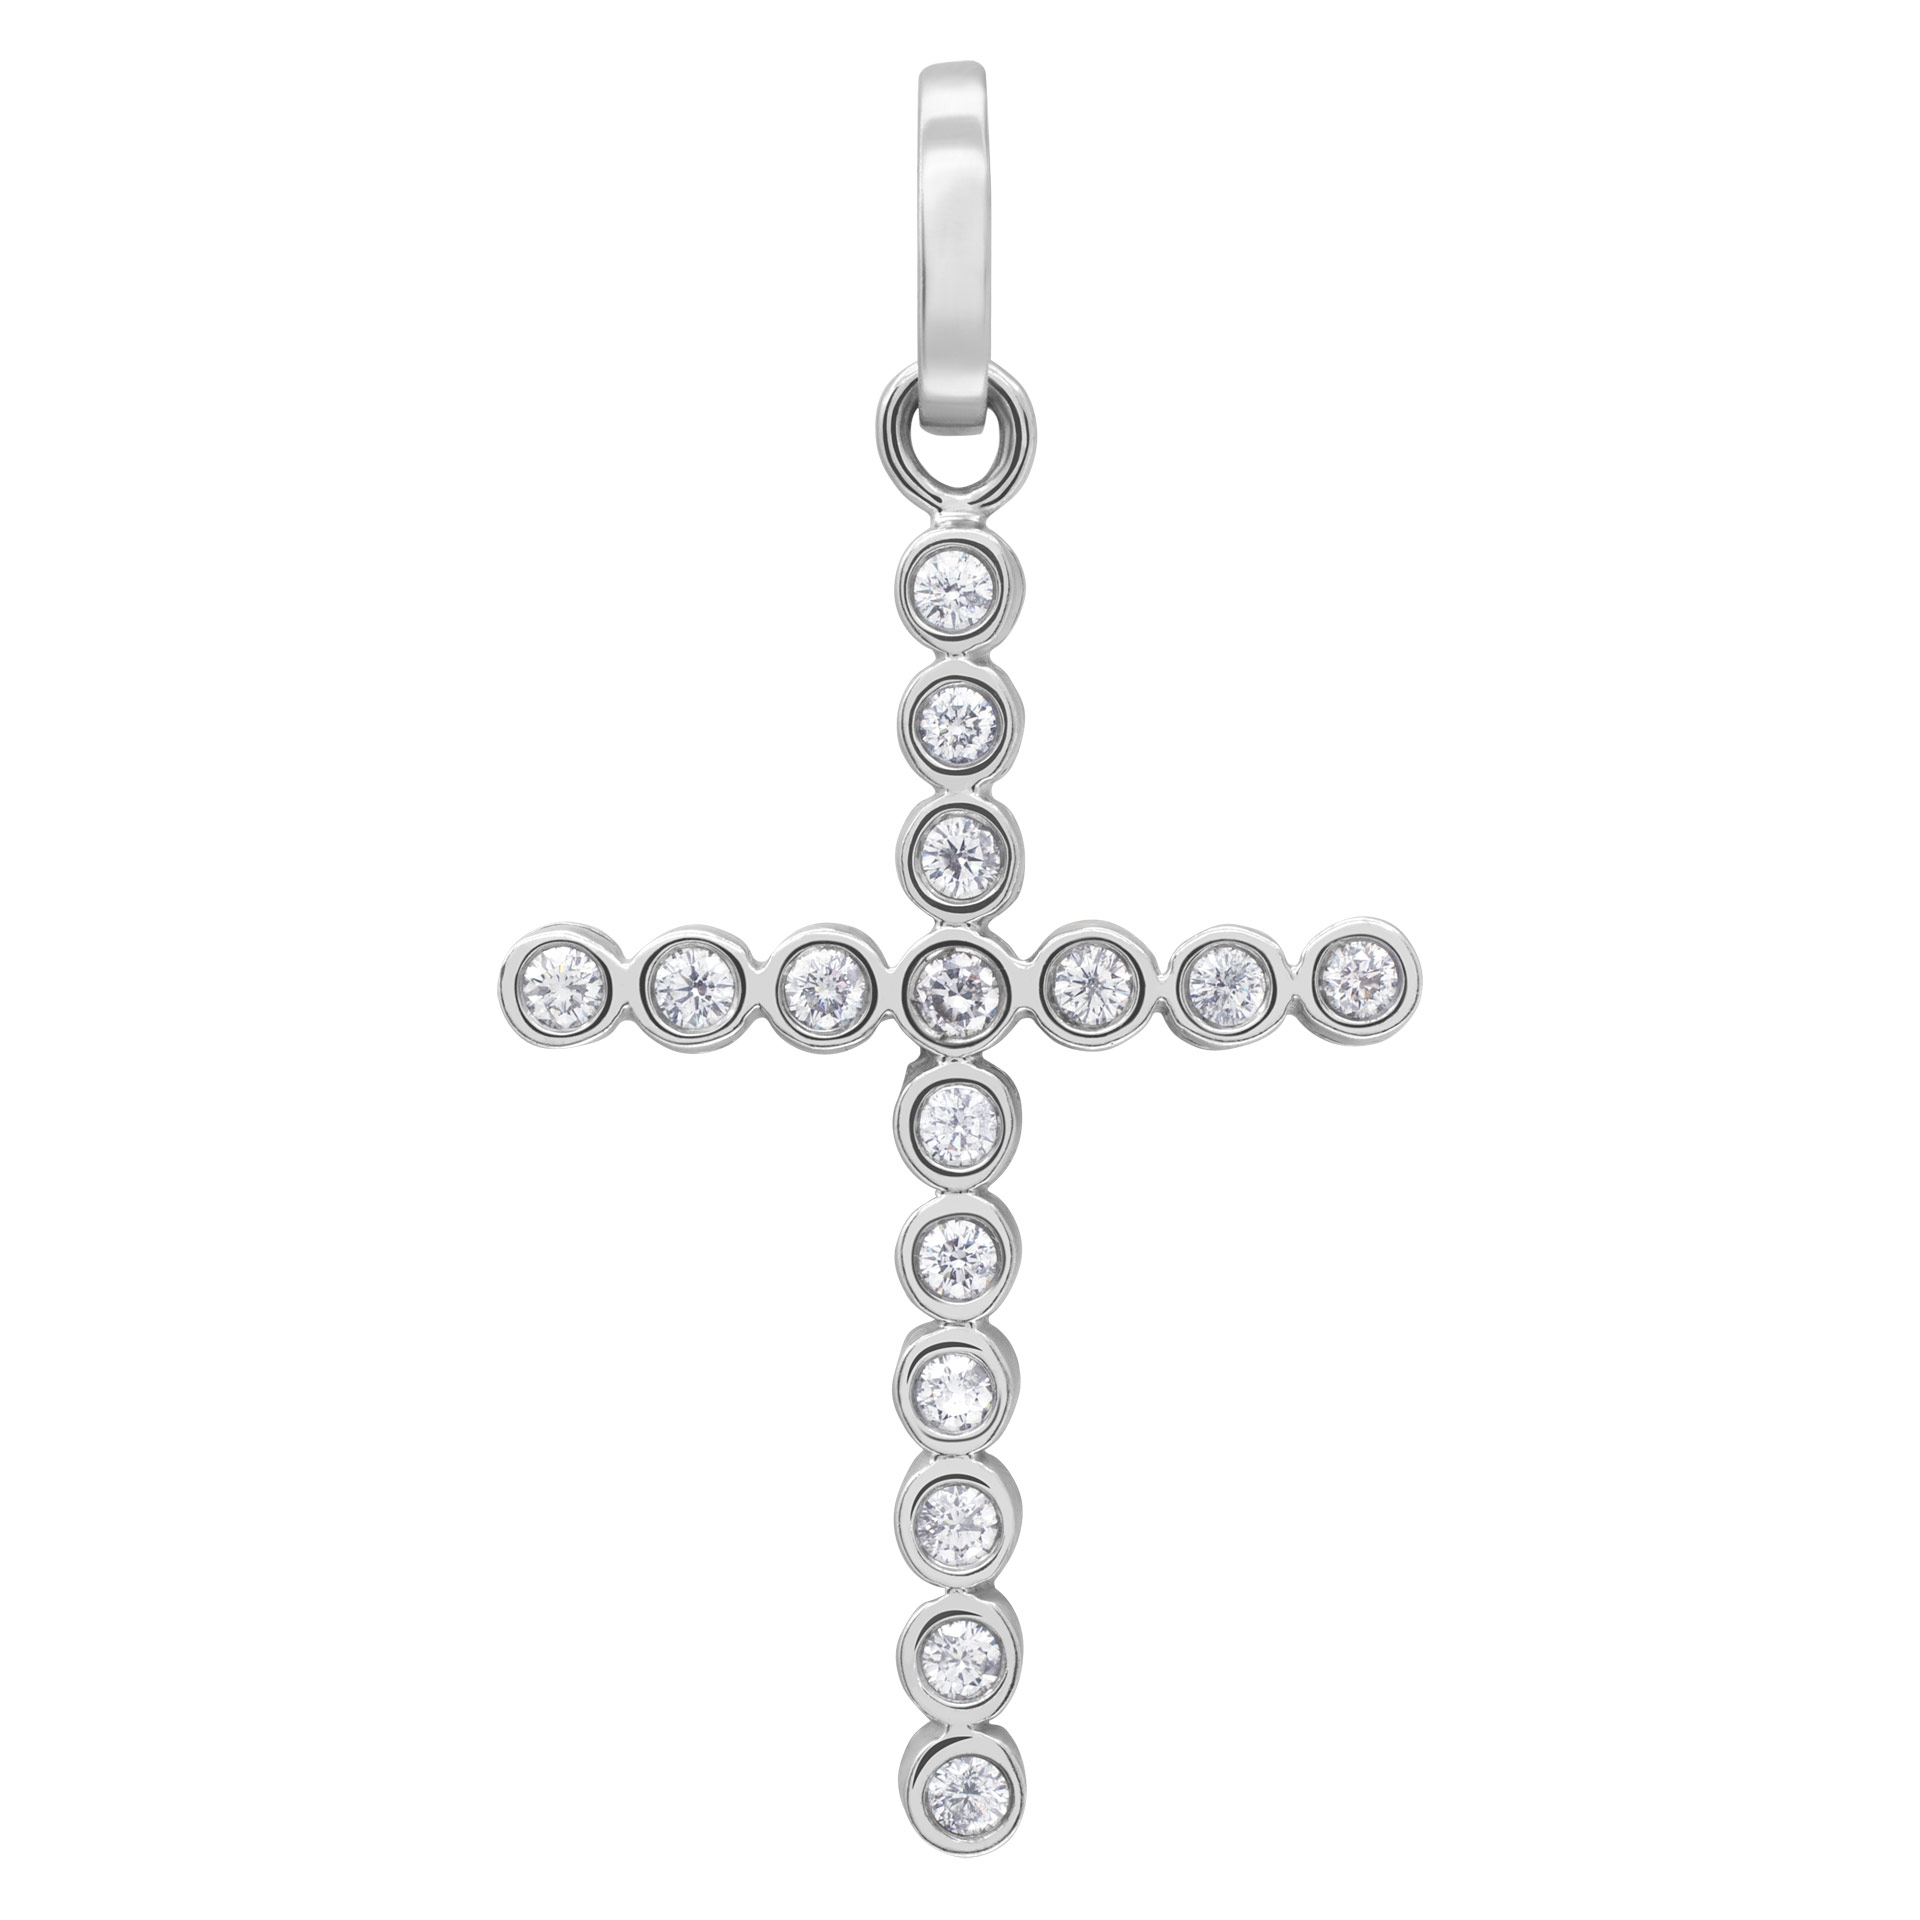 Diamond cross pendant in 14k white gold, approximatelty 4 carats.